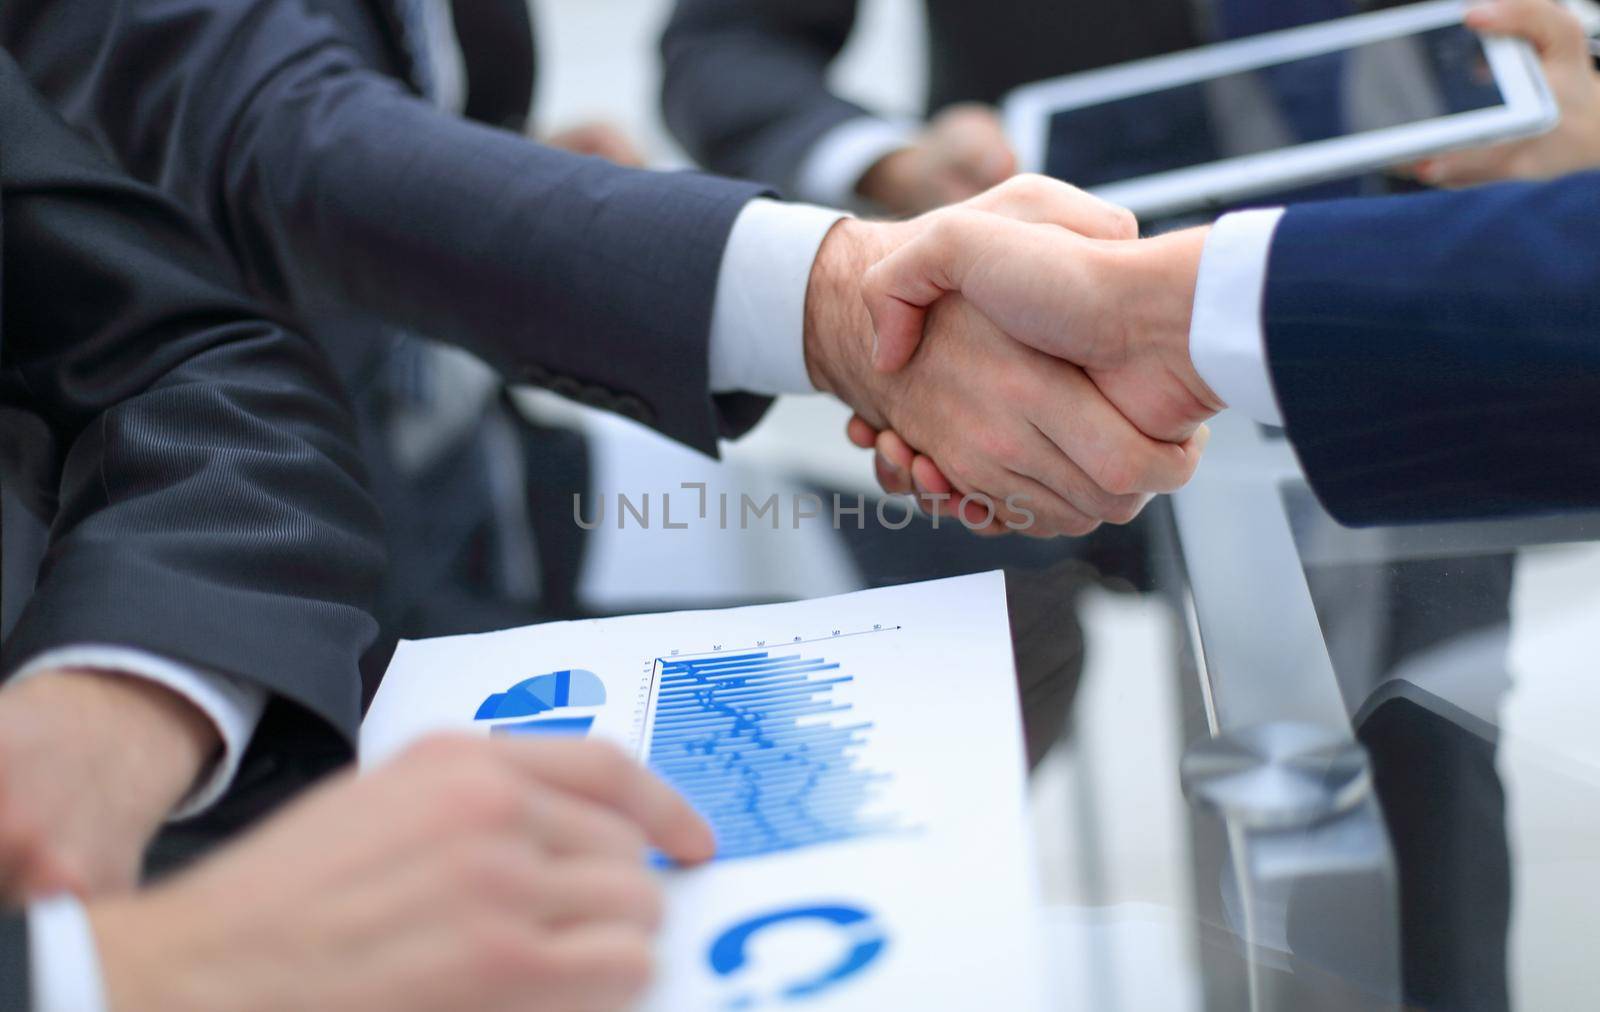 handshake business colleagues in office